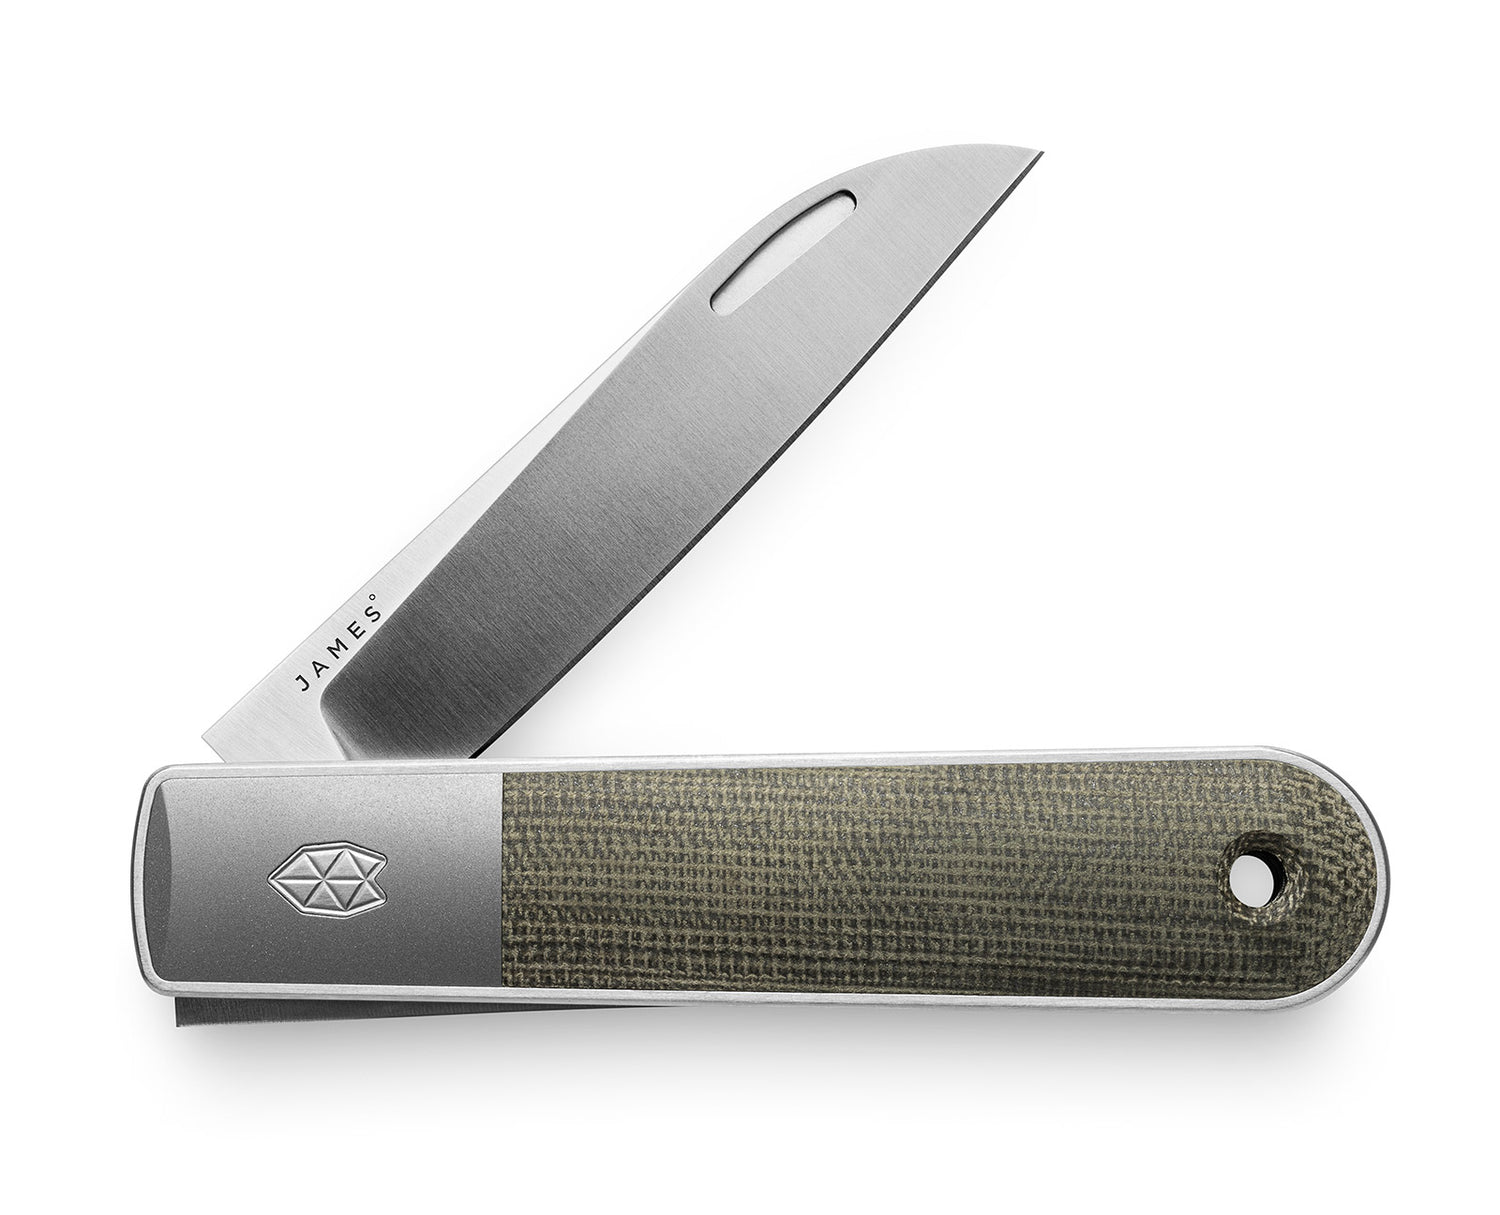 The Wayland knife with OD green handle and stainless steel blade.